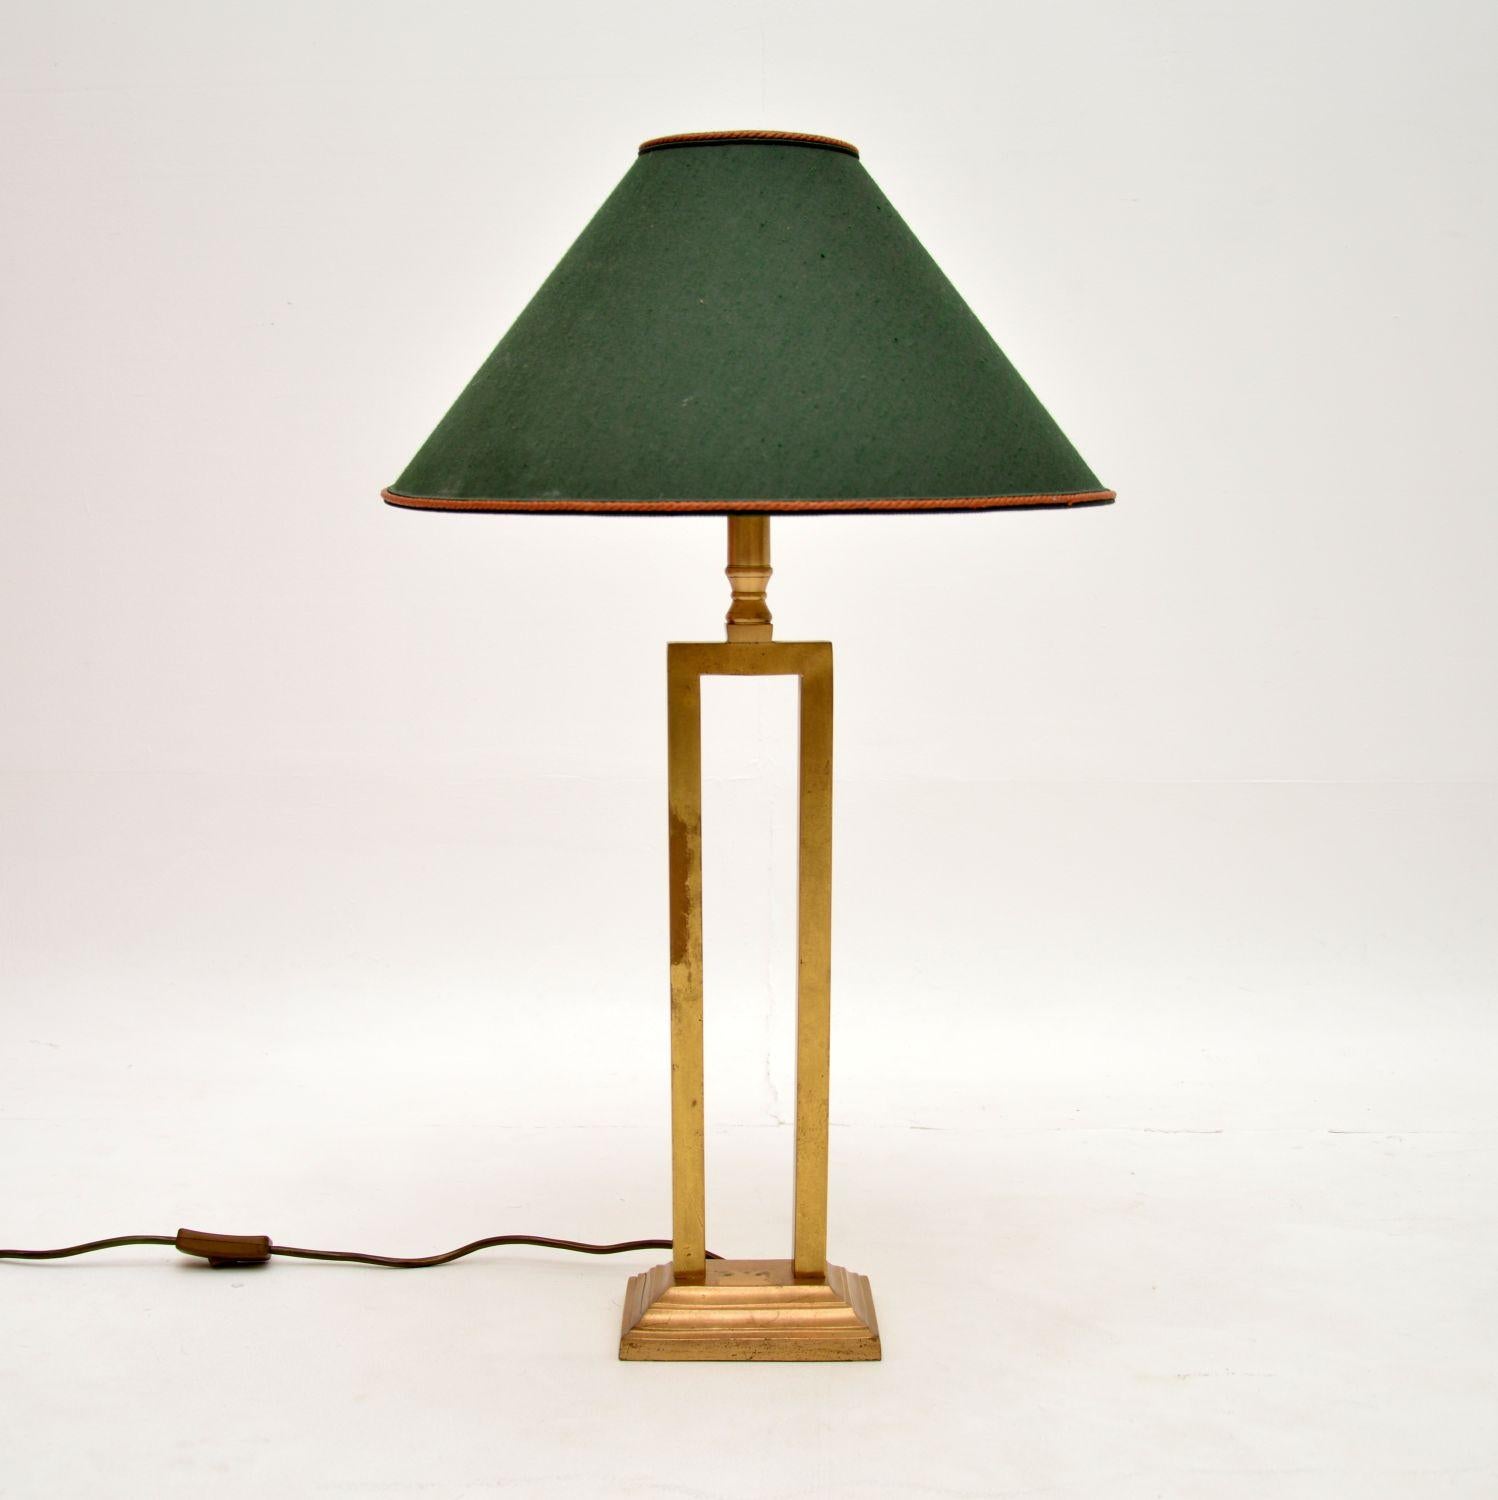 A very smart and stylish vintage brass table lamp. This was made in England, it dates from the 1960’s.

It has a lovely design and is of great quality. The condition is excellent for its age, it is in good working order, with only some extremely